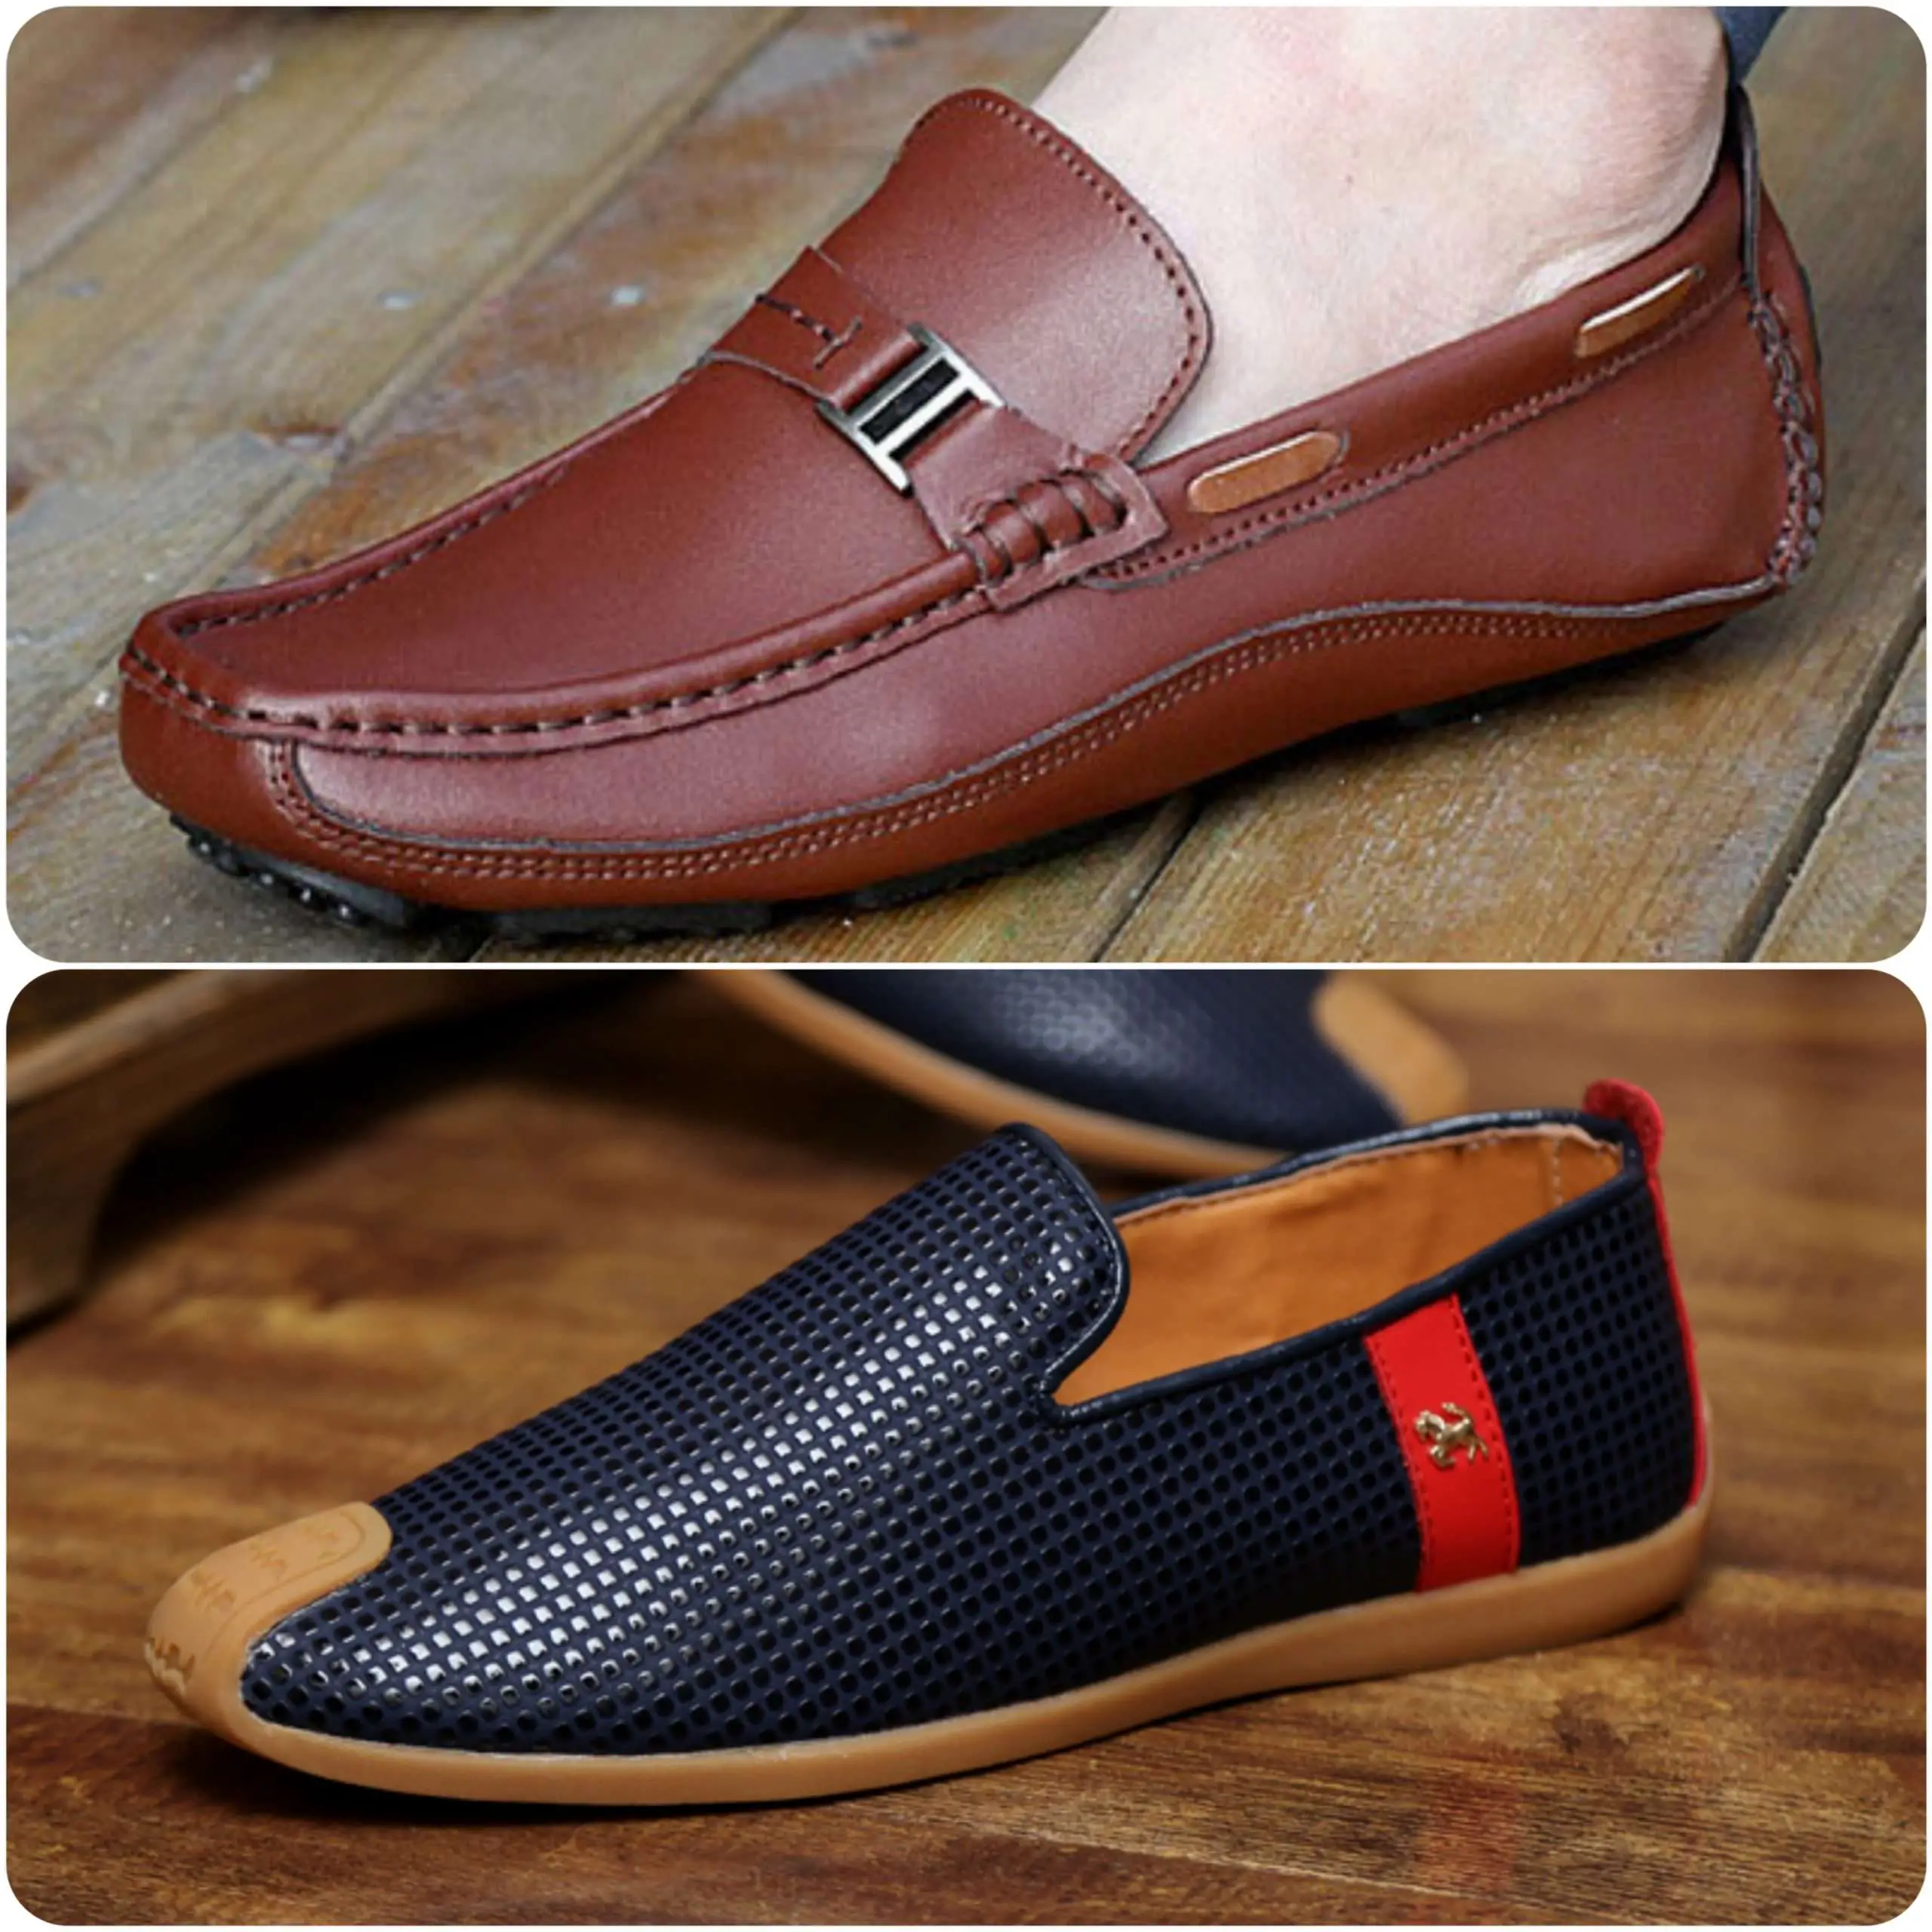 Latest Casual Shoes Designs for Men 2015